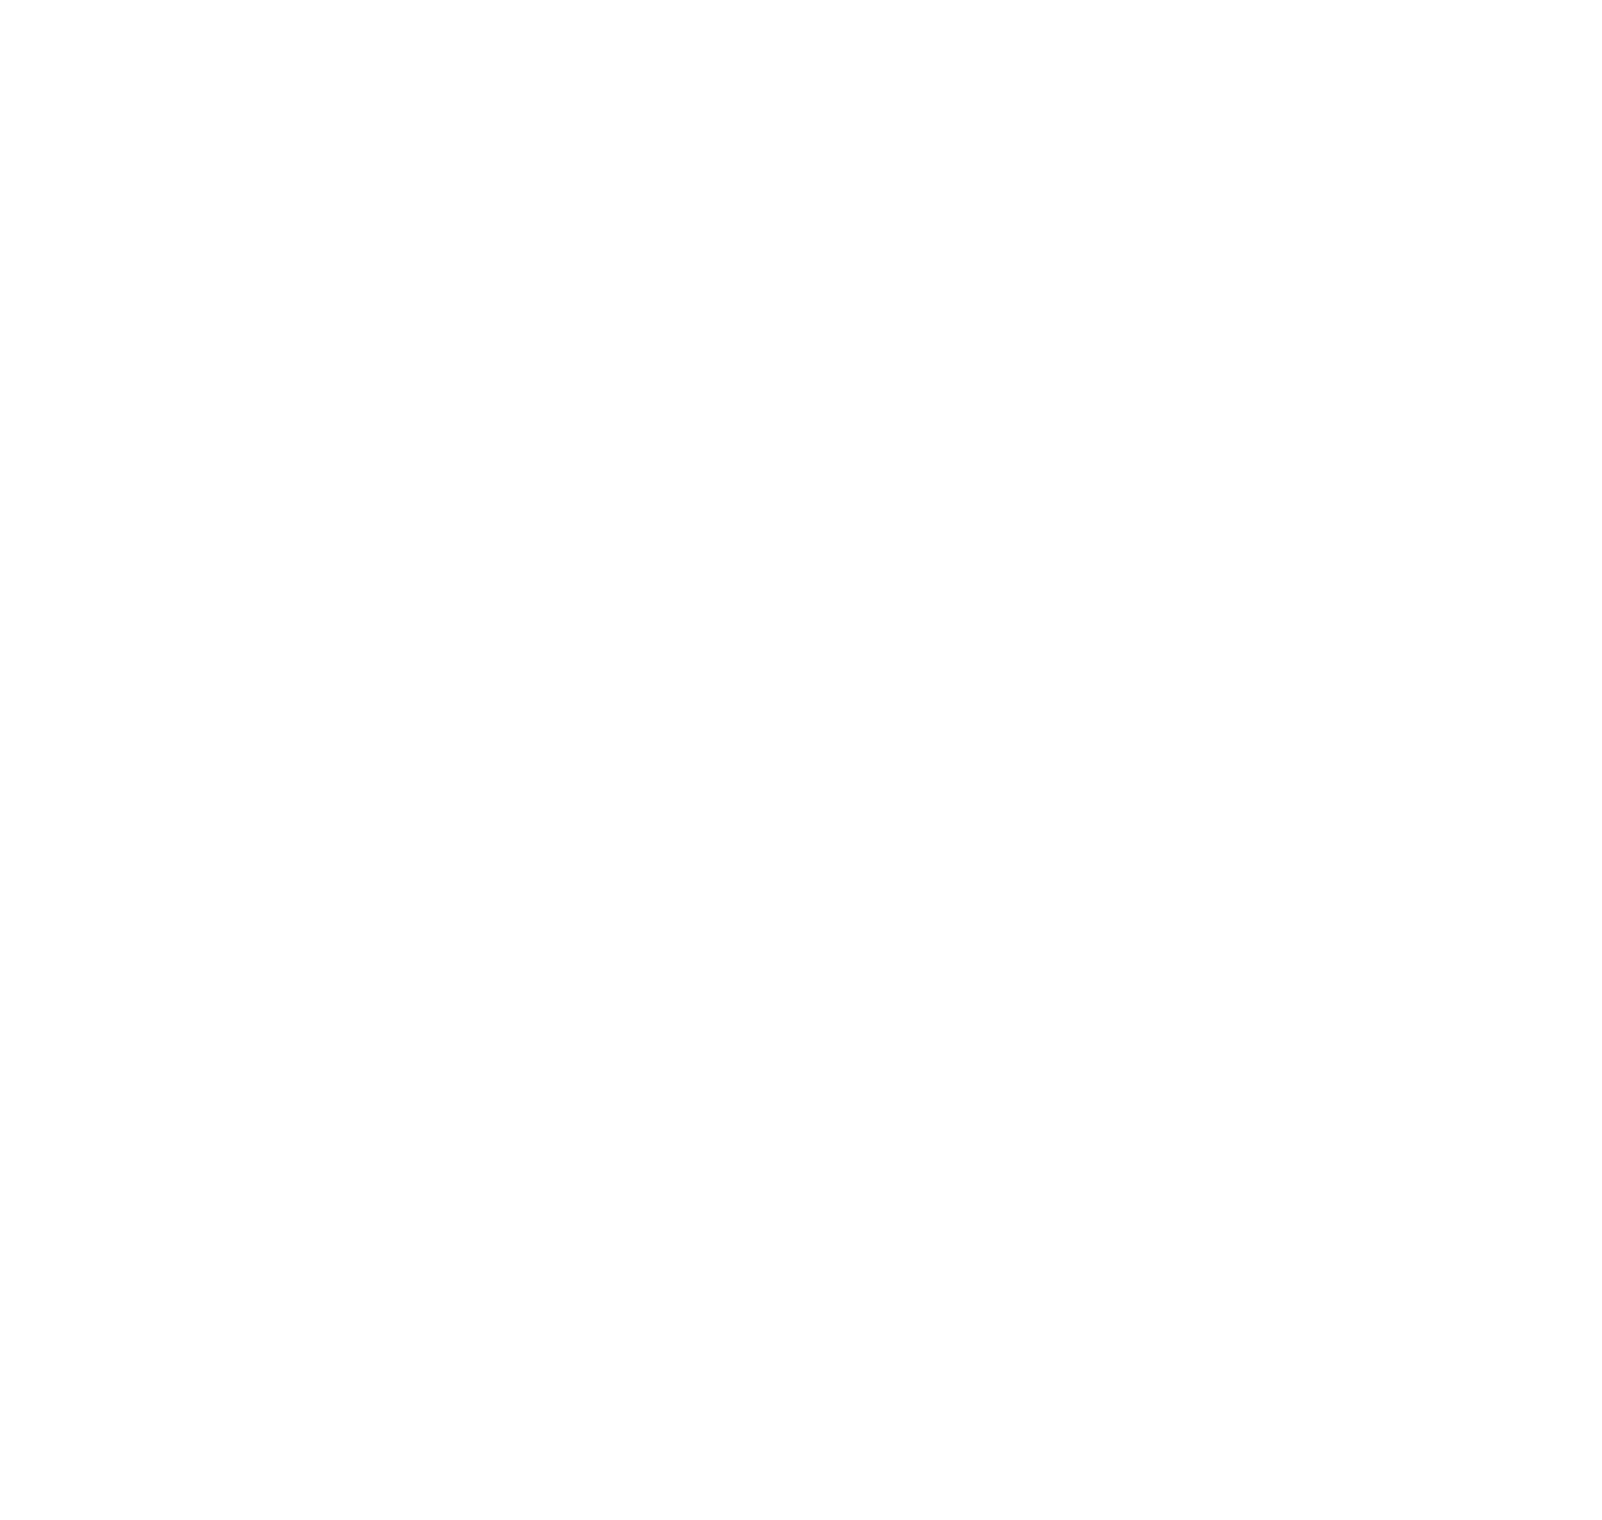 Bespoke e-commerce websites. Made just for you